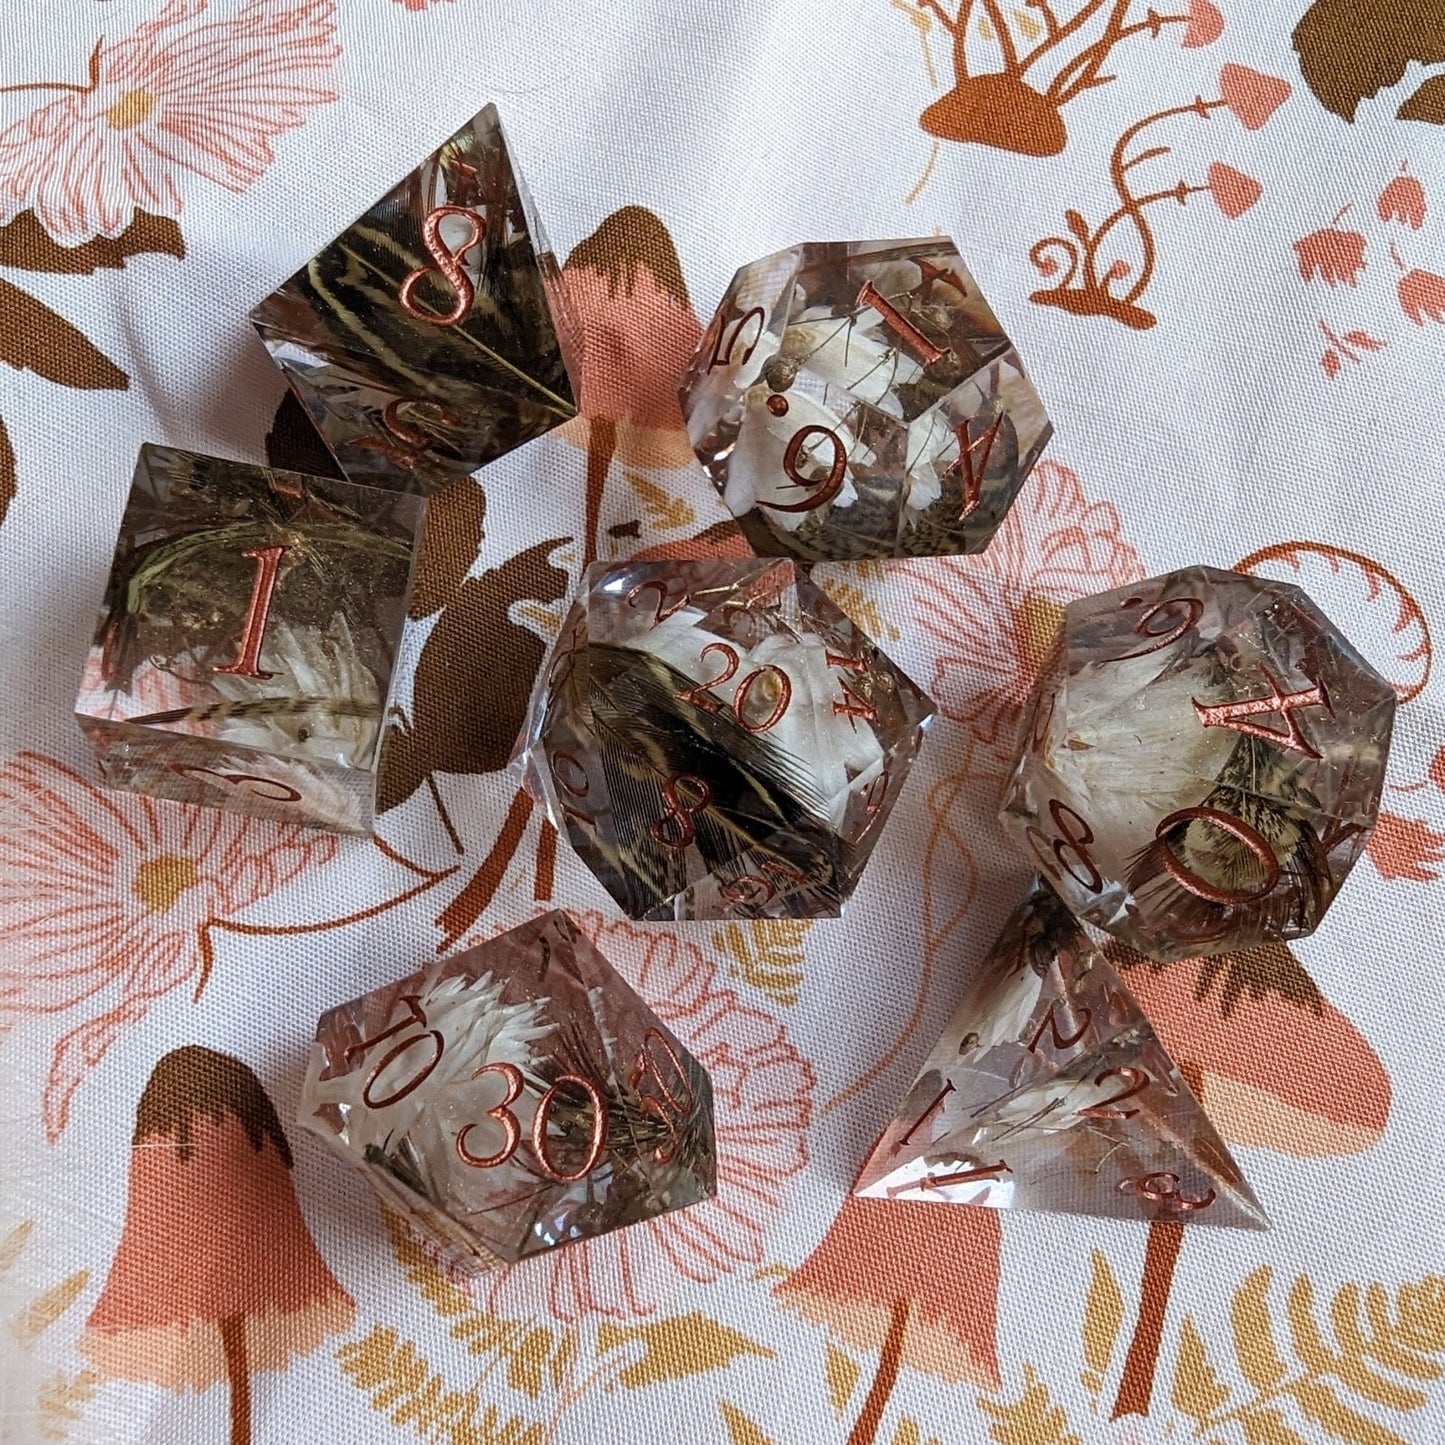 Gold Dust Flowers - 7 Dice Set (Sharp Edges, Copper Lettering) - The Fourth Place